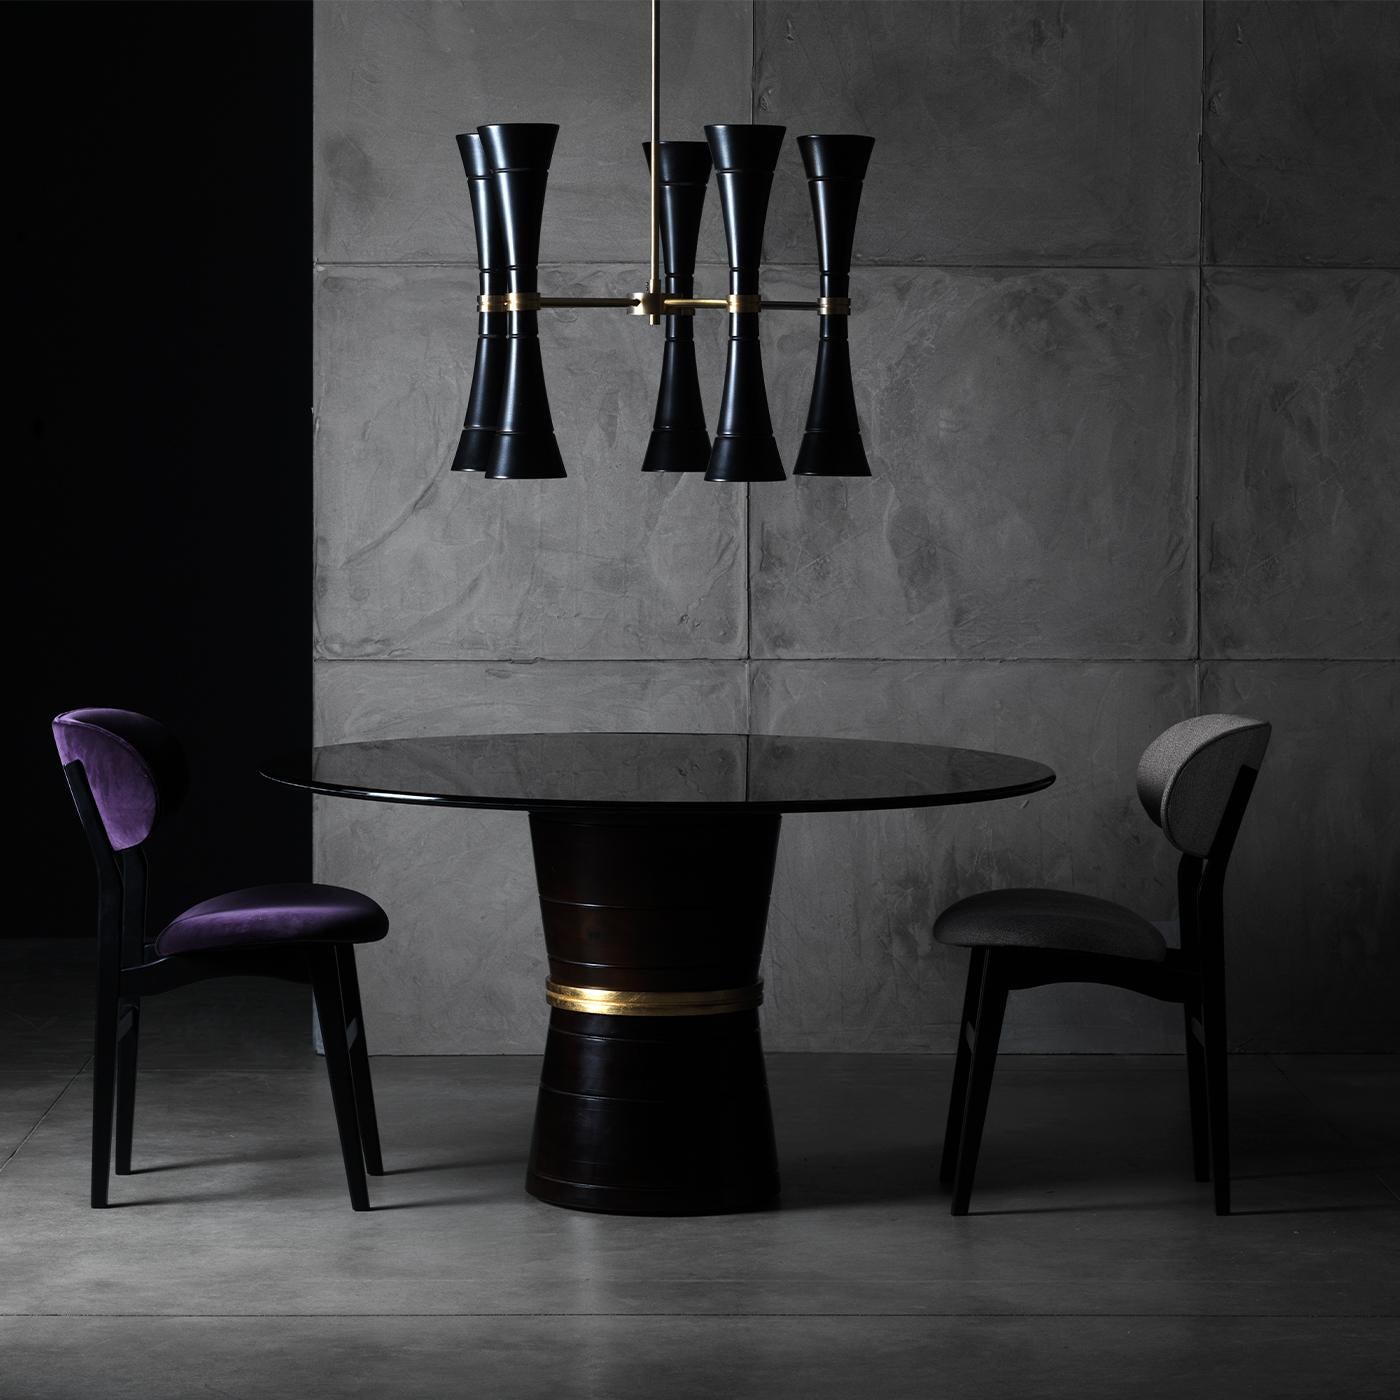 Taking modern styling to new heights, the Cone Dining Table is defined by its unique silhouette. Its bobbin-shaped base is crafted from solid wood with a dark walnut finish, accentuated with a gold metal detail and topped with a smoked tempered